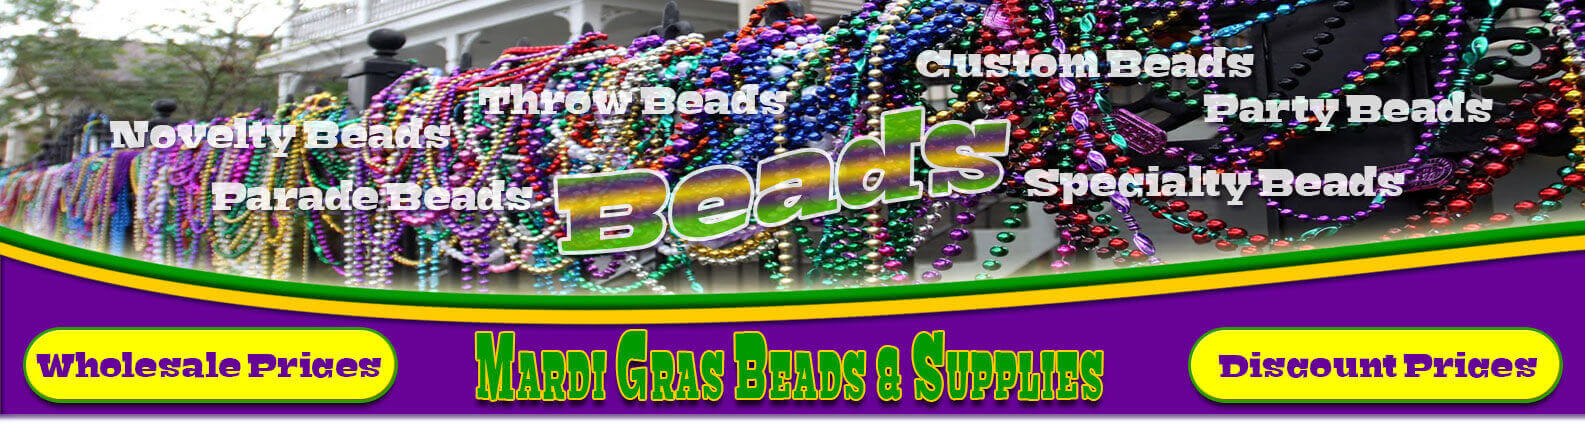 Mardi Gras Beads  for All Holiday Parades & Parties!